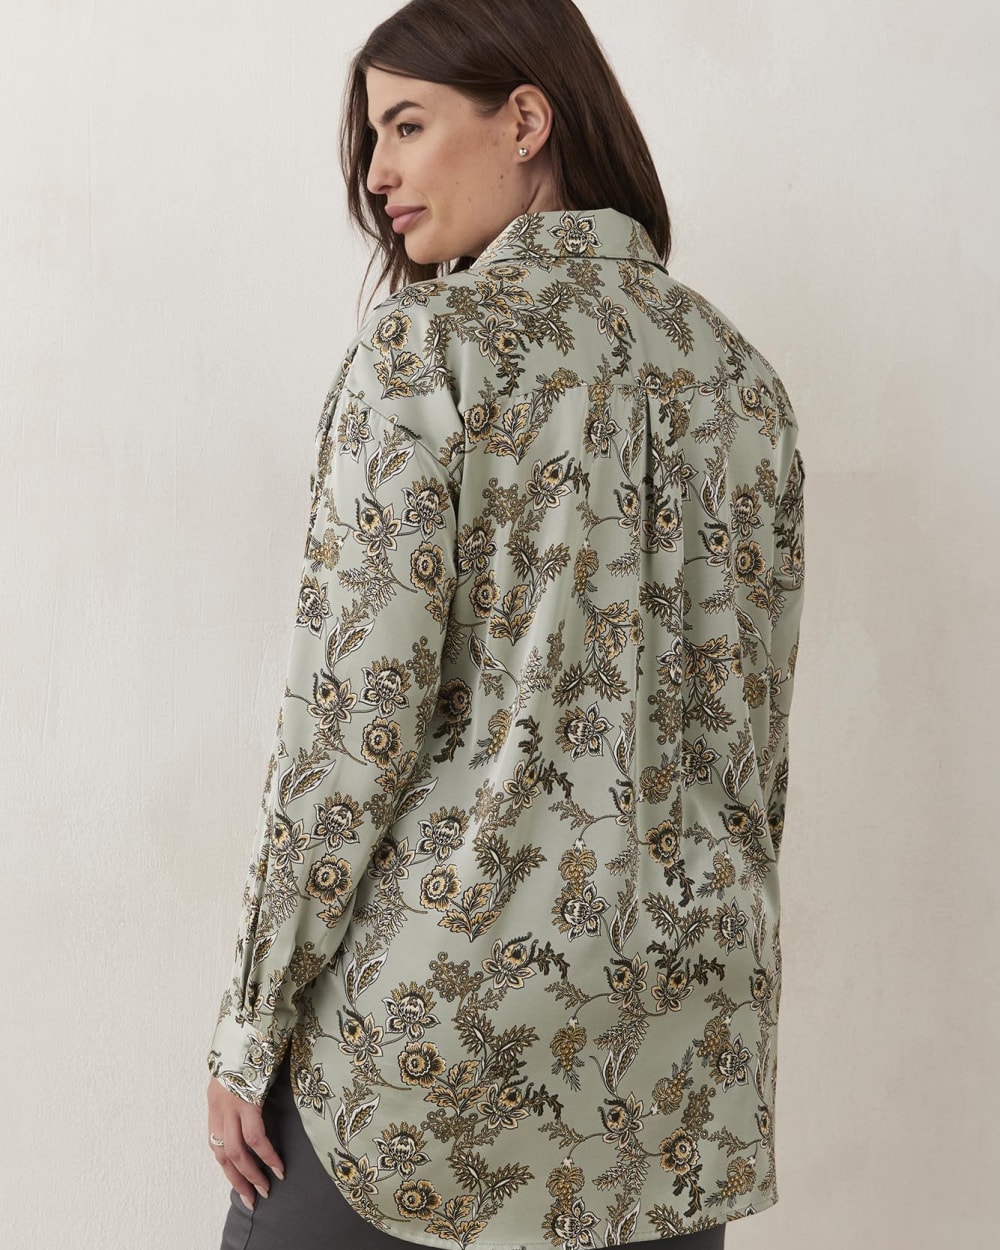 Printed Satin Blouse with High-Low Hem